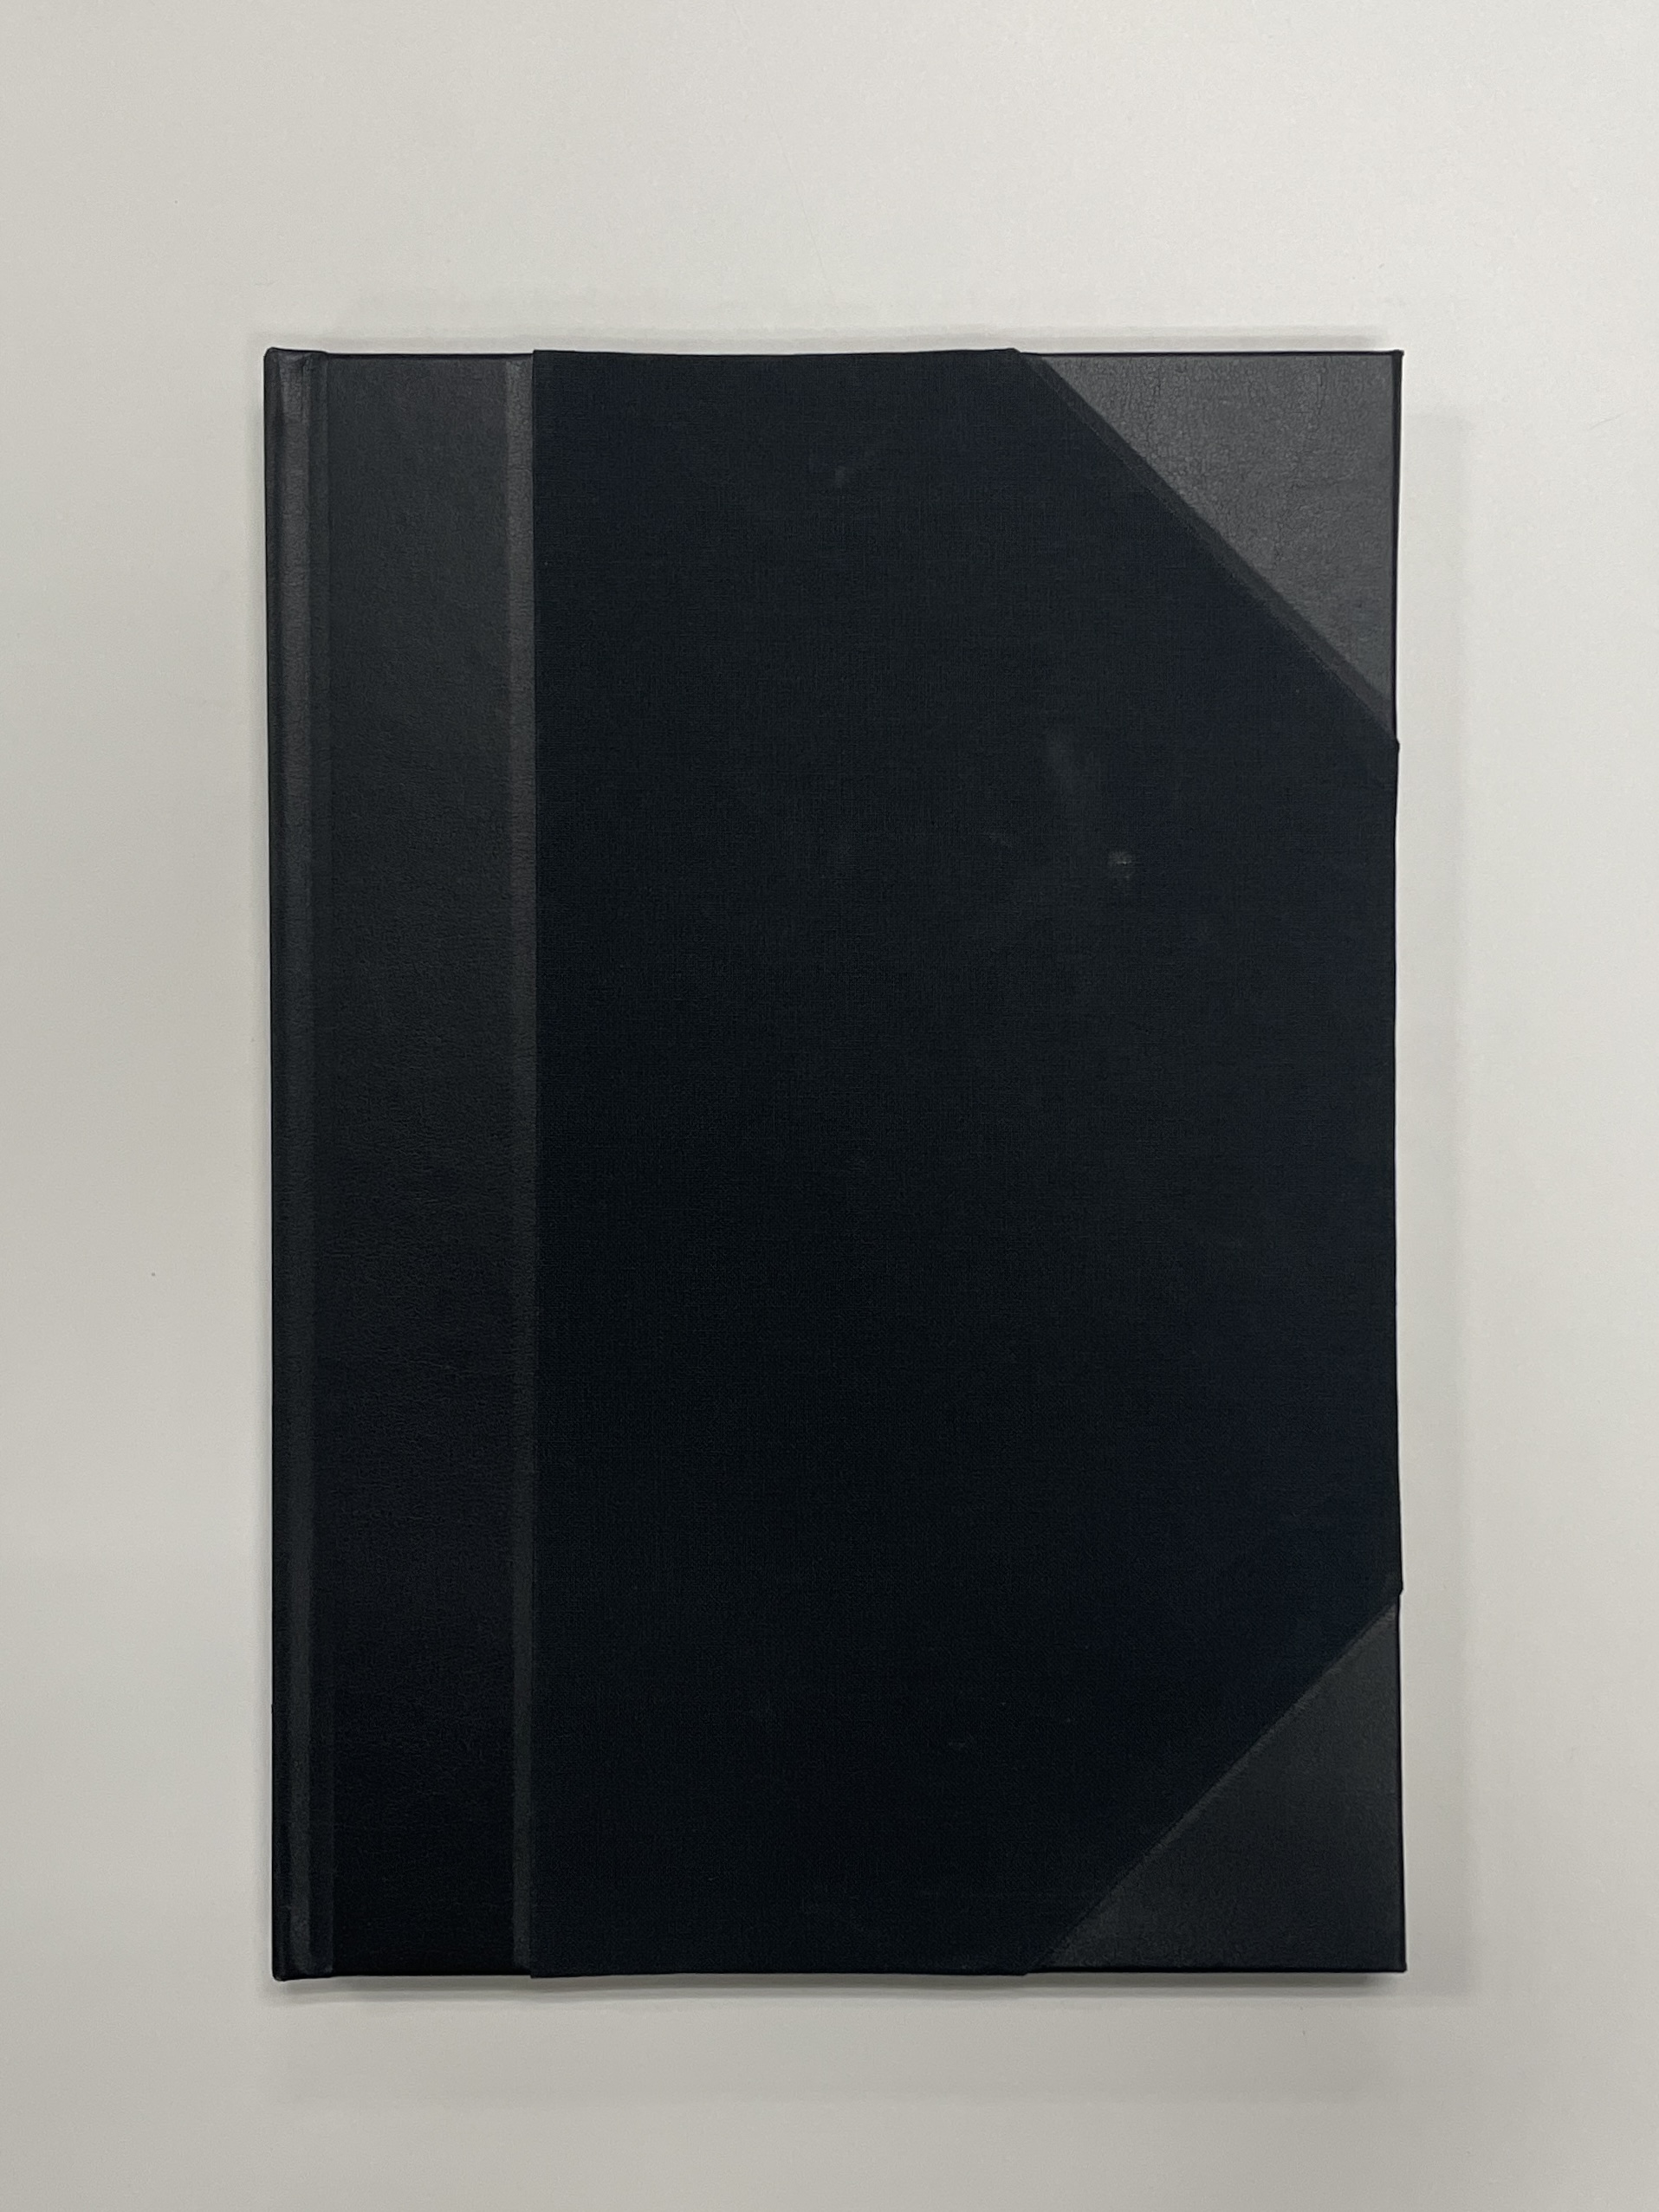 PHOTOGRAPHY BOOKS - MICHAEL KENNA - Image 6 of 9